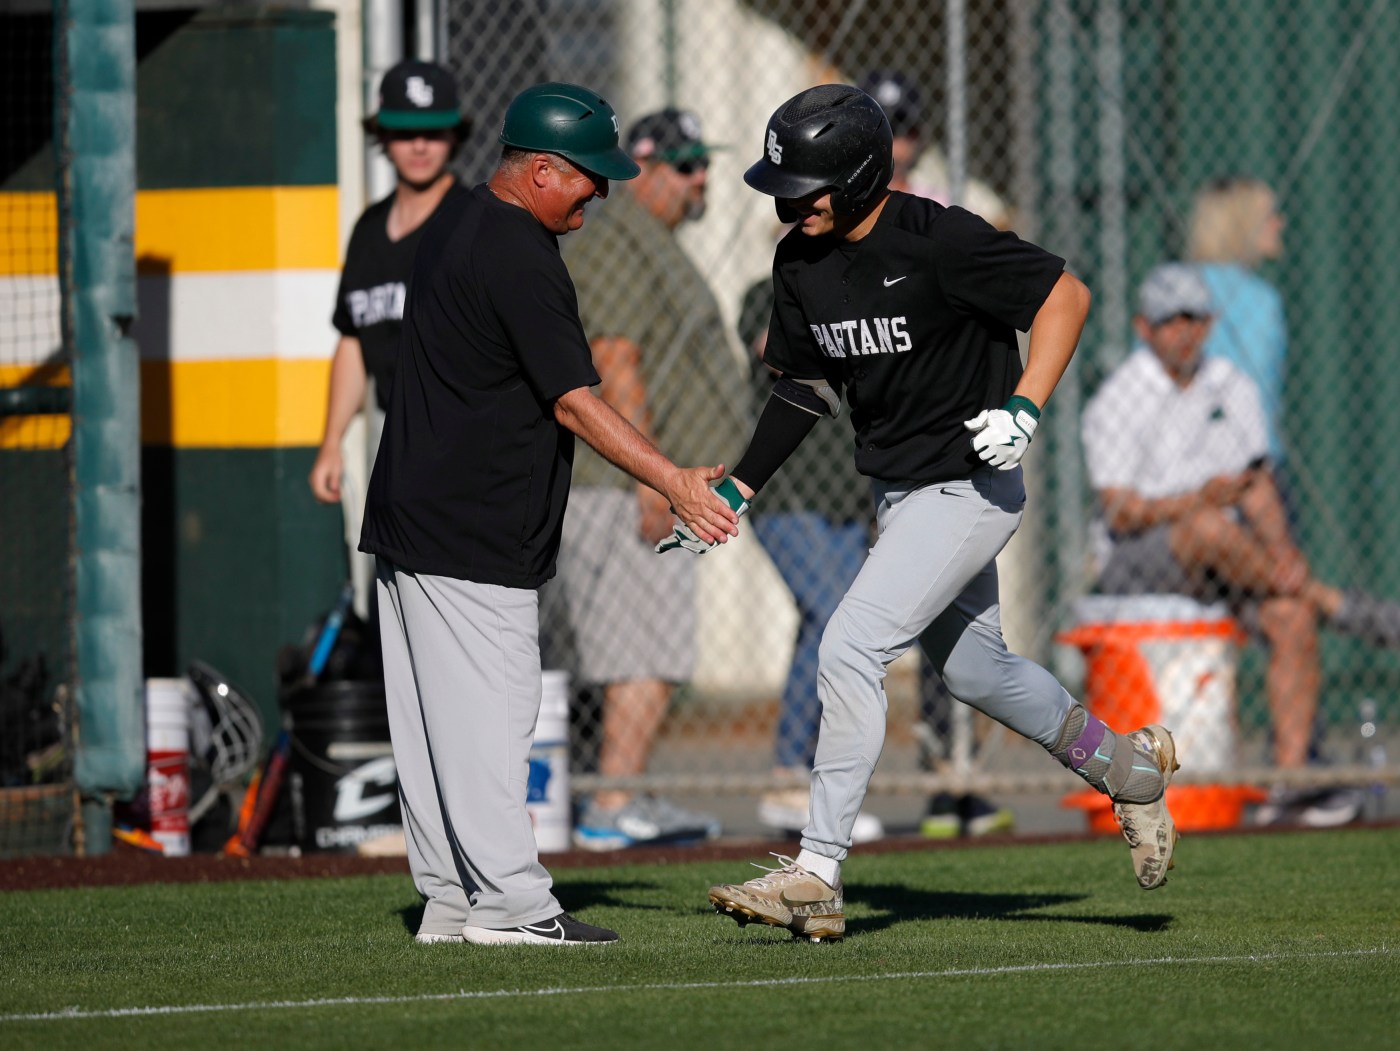 de-la-salle-baseball-accused-of-sign-stealing-in-formal-complaint-to-ncs-spartans-adamantly-deny-allegations.